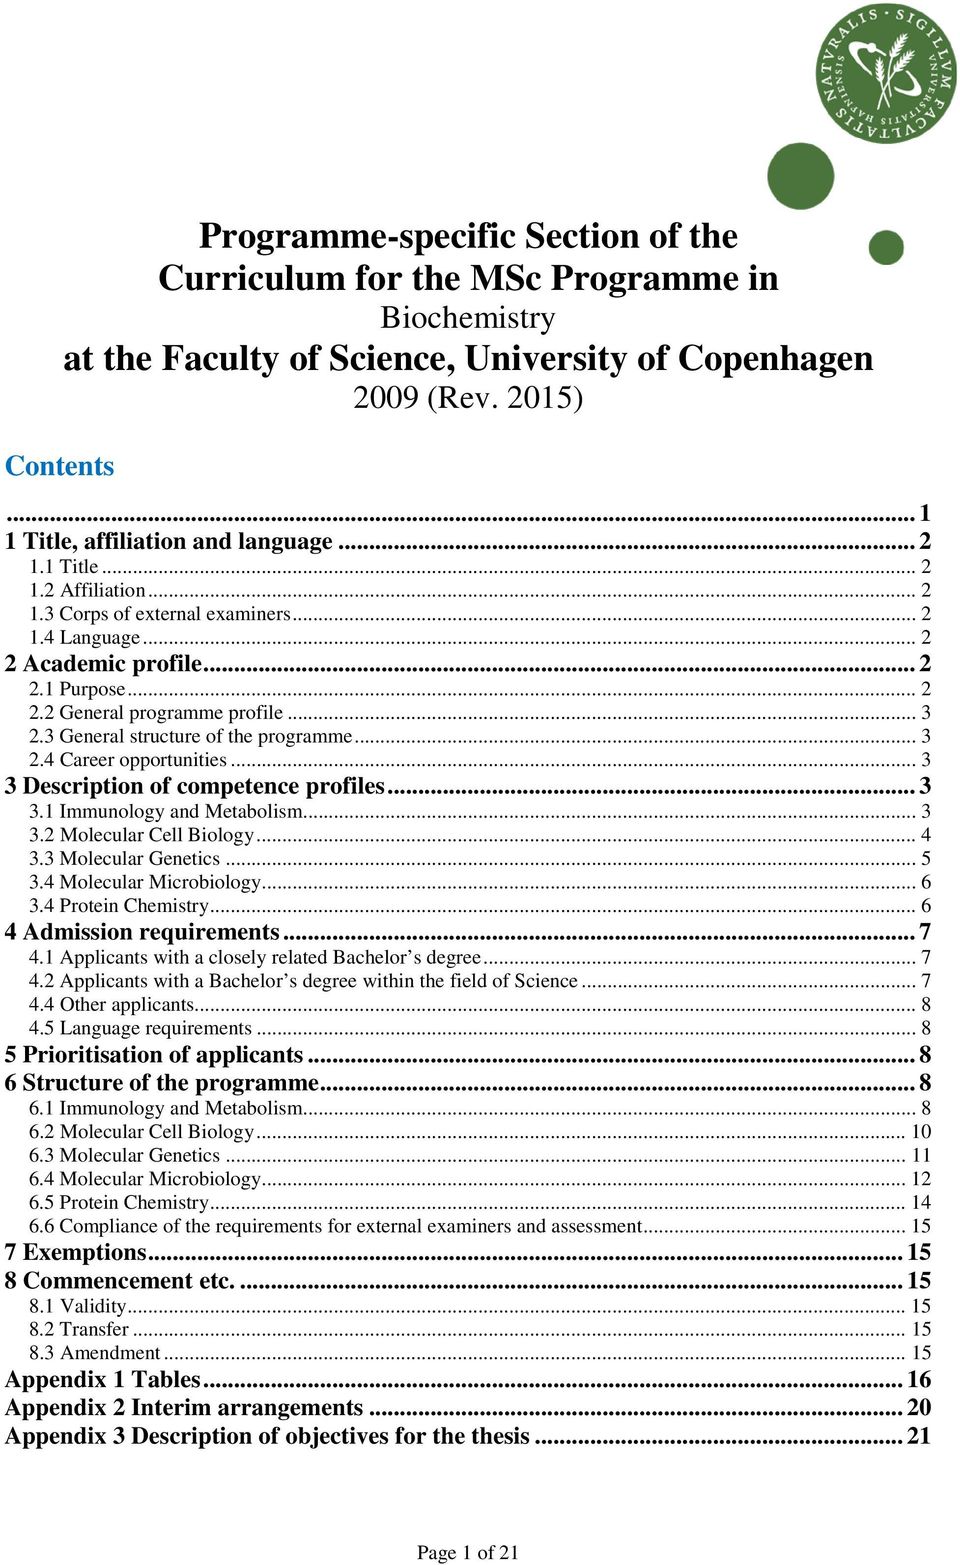 3 General structure of the programme... 3 2.4 Career opportunities... 3 3 Description of competence profiles... 3 3.1 Immunology and Metabolism... 3 3.2 Molecular Cell Biology... 4 3.